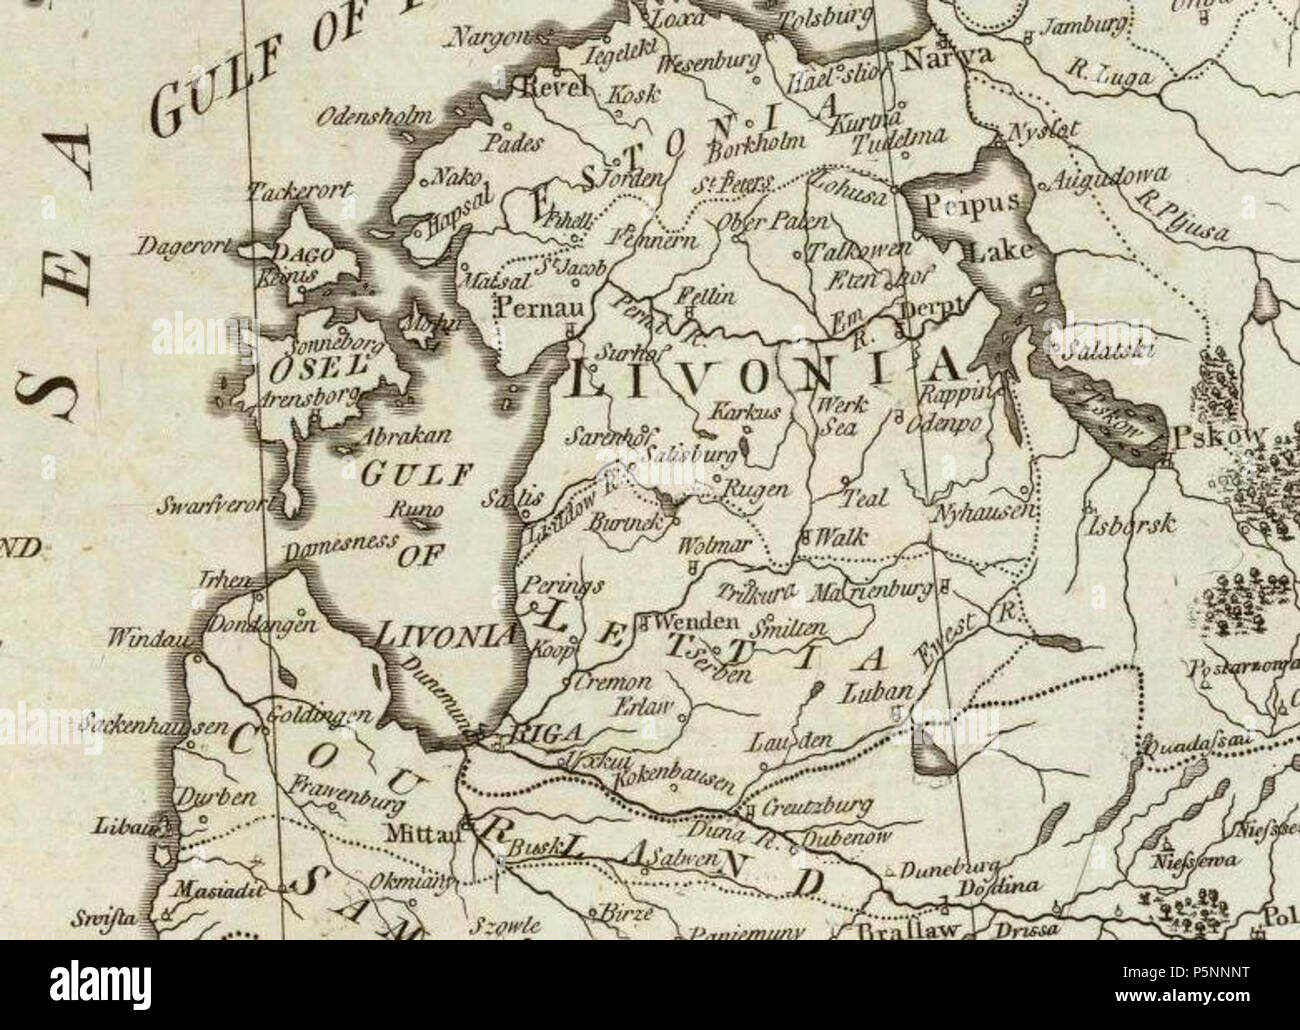 N/A. Part of 'A new map of the Northern States containing the Kingdoms of Sweden, Denmark, and Norway' showing Baltic Noble corporations . 1790.   Thomas Kitchin  (1719–1784)    Description British cartographer and engraver  Date of birth/death 1718 1784  Location of birth/death United Kingdom United Kingdom  Authority control  : Q3688020 VIAF:37186414 ISNI:0000 0001 0888 7679 LCCN:n80036699 NLA:35983985 Open Library:OL7228898A WorldCat 166 BalticCorp Stock Photo